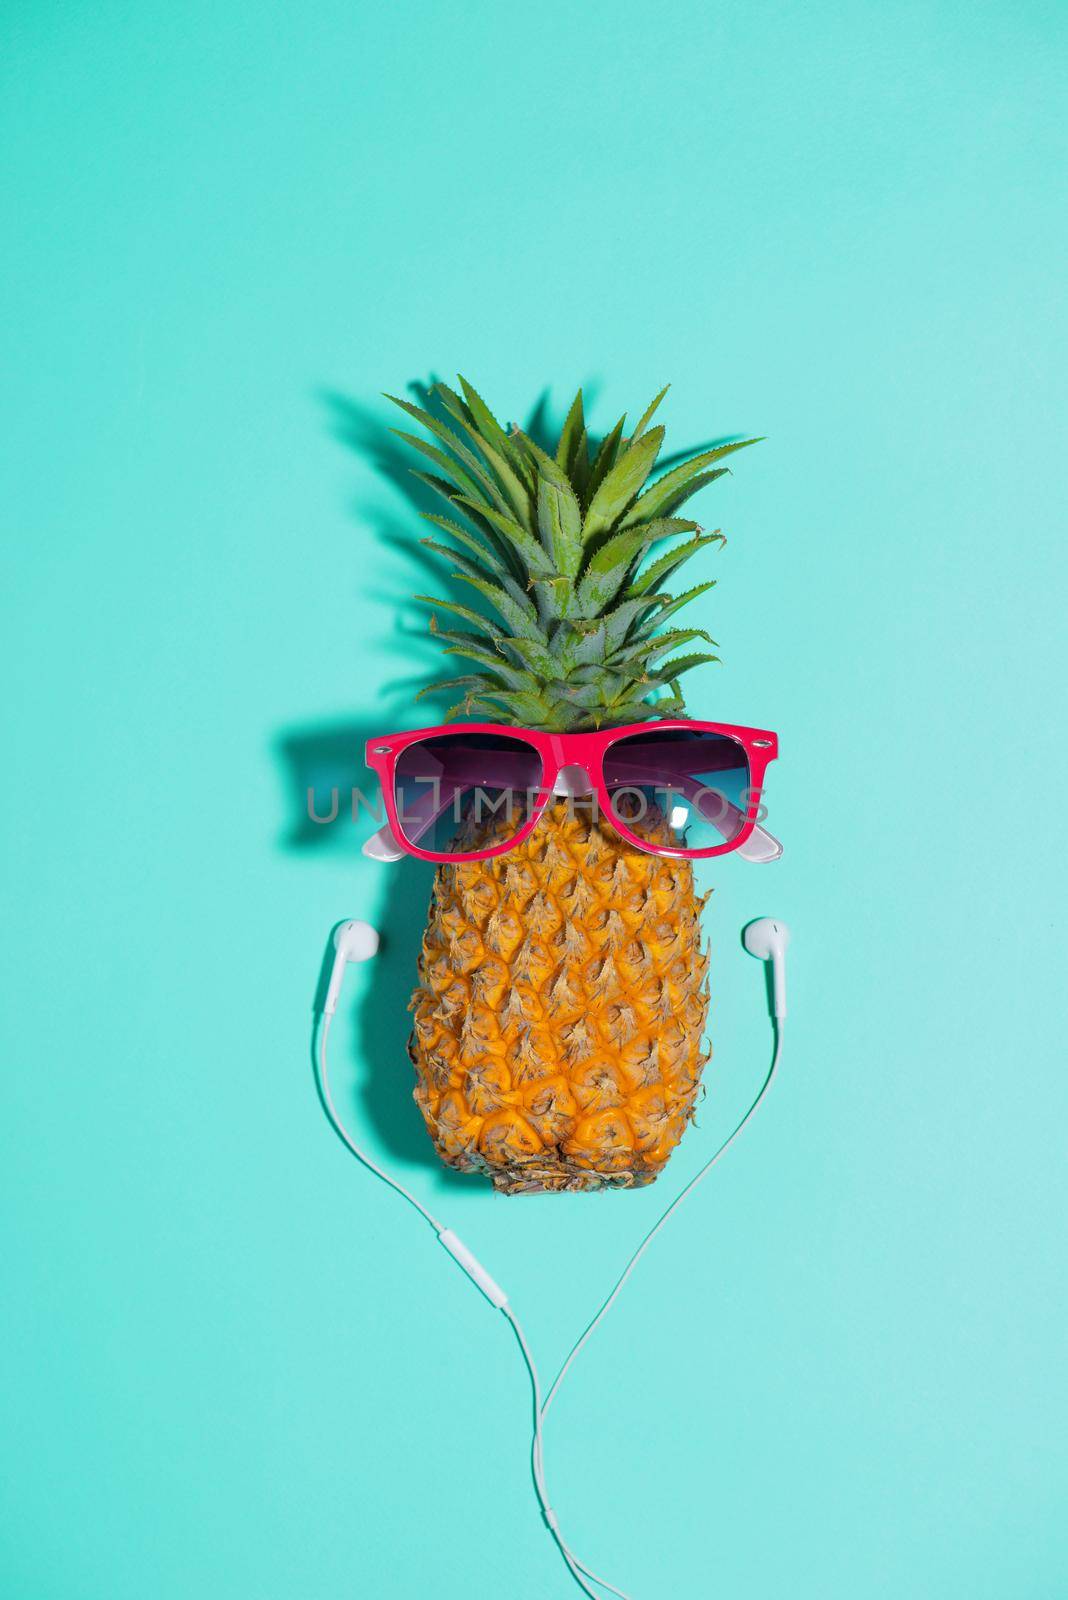 Fashion pineapple with sunglasses and headphones listens to music over blue background